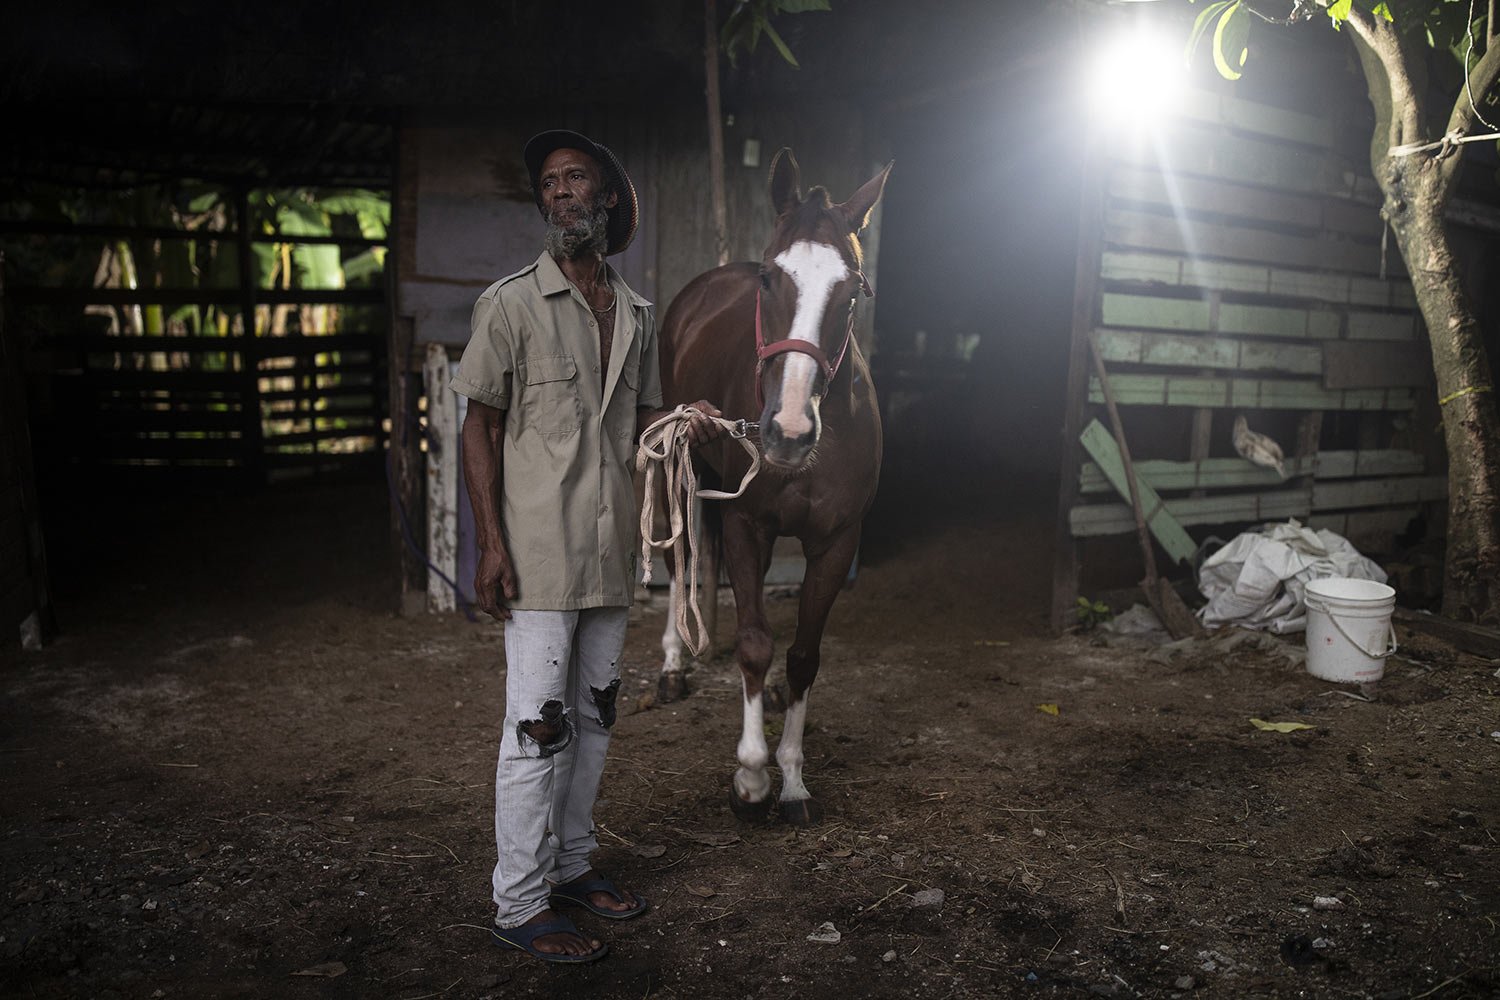  Horse caretaker Anselmo Sams poses for a portrait with a racehorse Cleopatra on San Andres Island in Colombia, Tuesday, Nov. 8, 2022. (AP Photo/Ivan Valencia) 